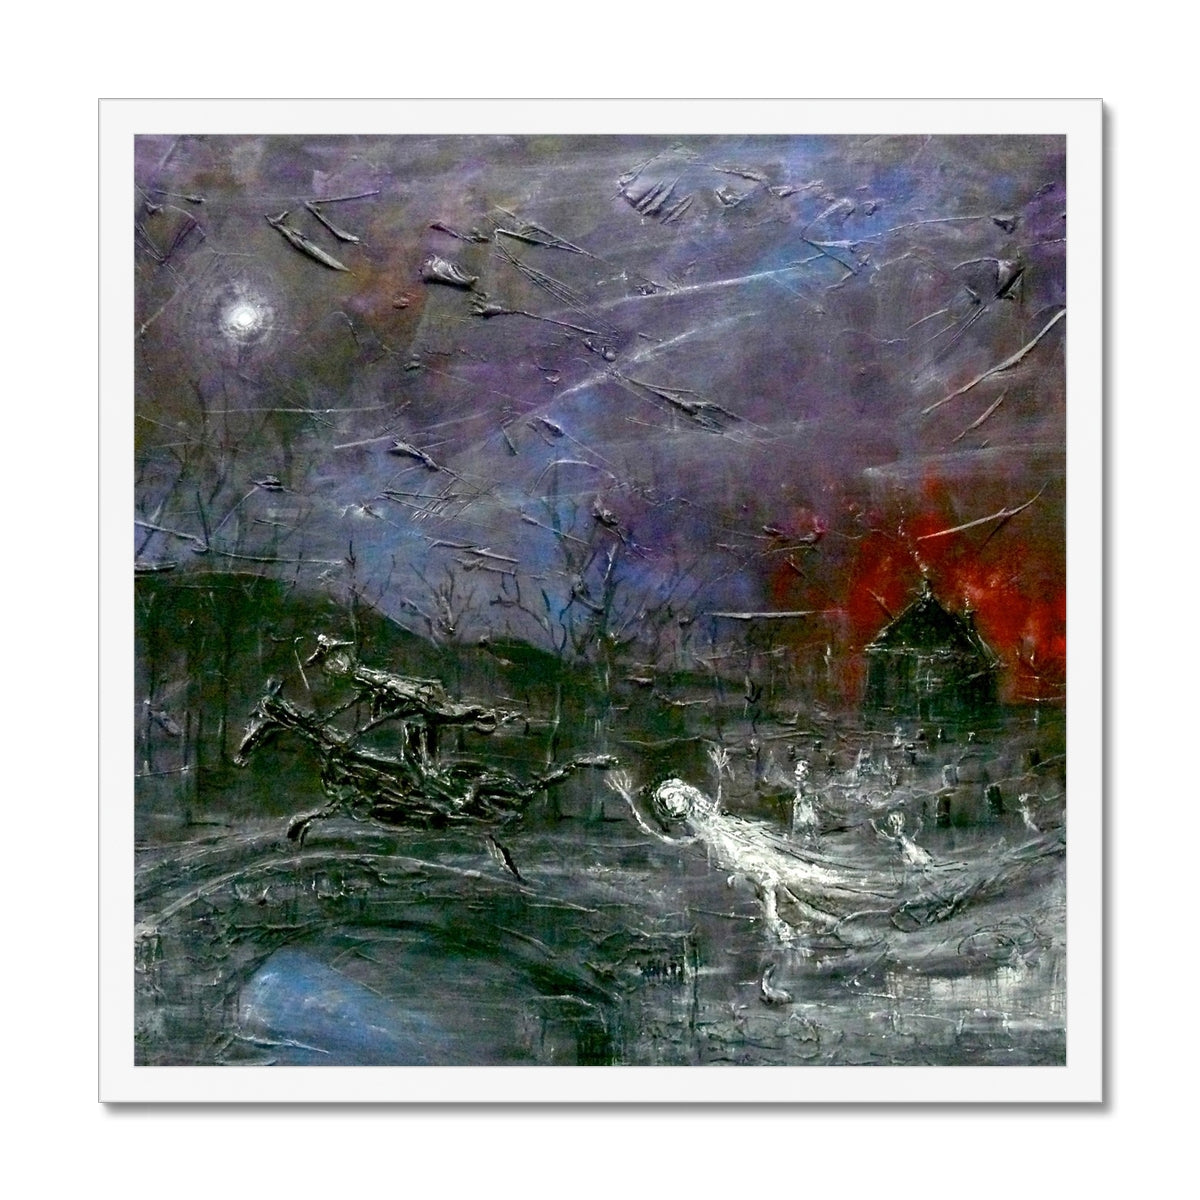 Tam O Shanter Painting | Framed Prints From Scotland-Framed Prints-Abstract & Impressionistic Art Gallery-20"x20"-White Frame-Paintings, Prints, Homeware, Art Gifts From Scotland By Scottish Artist Kevin Hunter